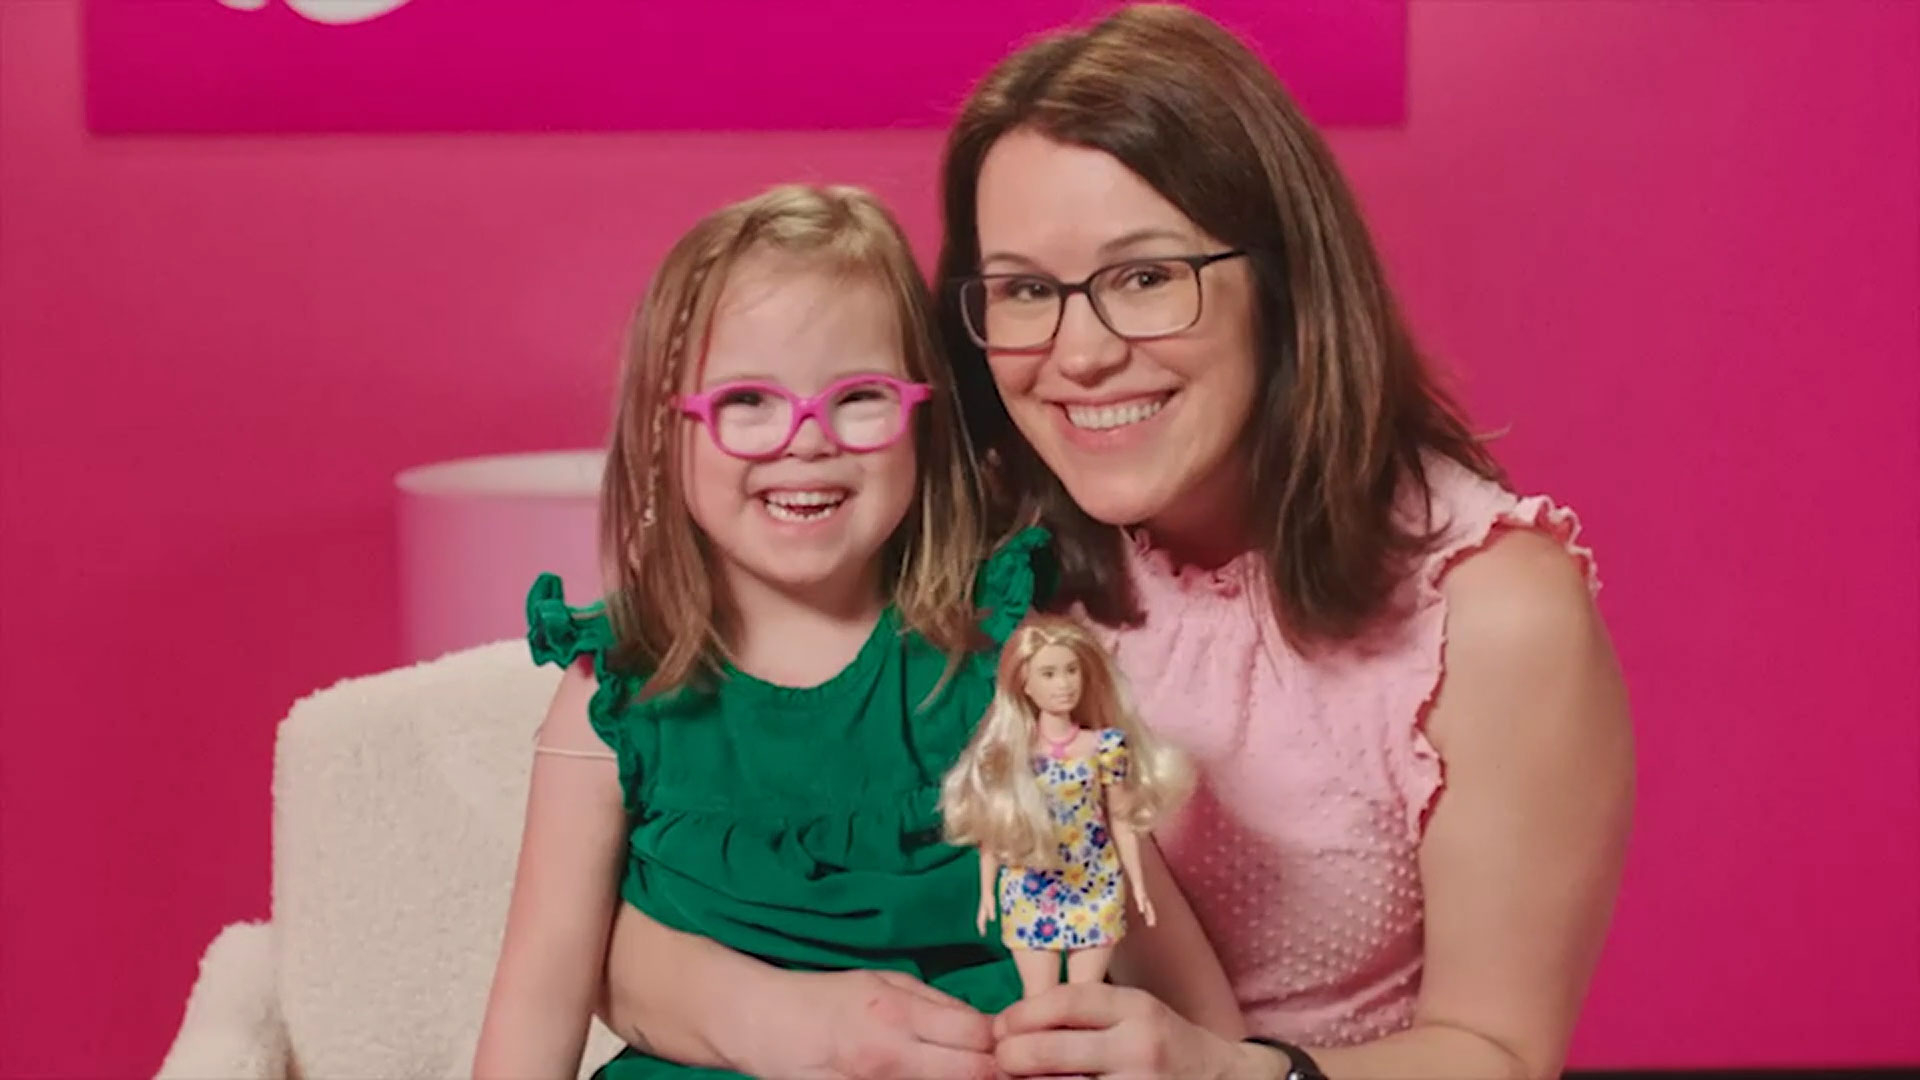 Barbie® Introduces Its First Doll with Down Syndrome, Further Increasing Representation in the Toy Aisle